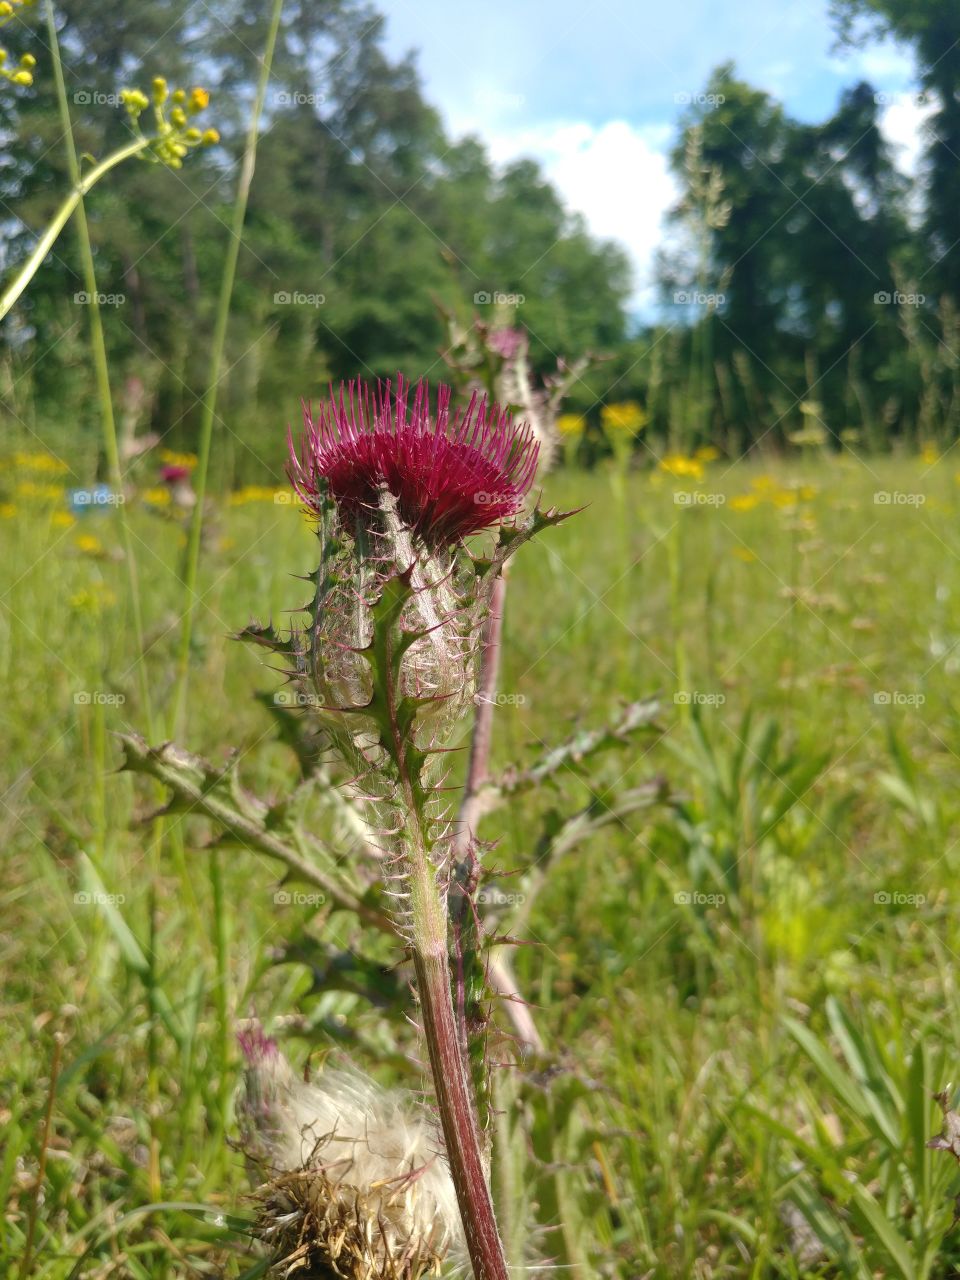 some Cirsium vulgare (Common or Spear Thistle) growing in a field enjoying the sunshine!